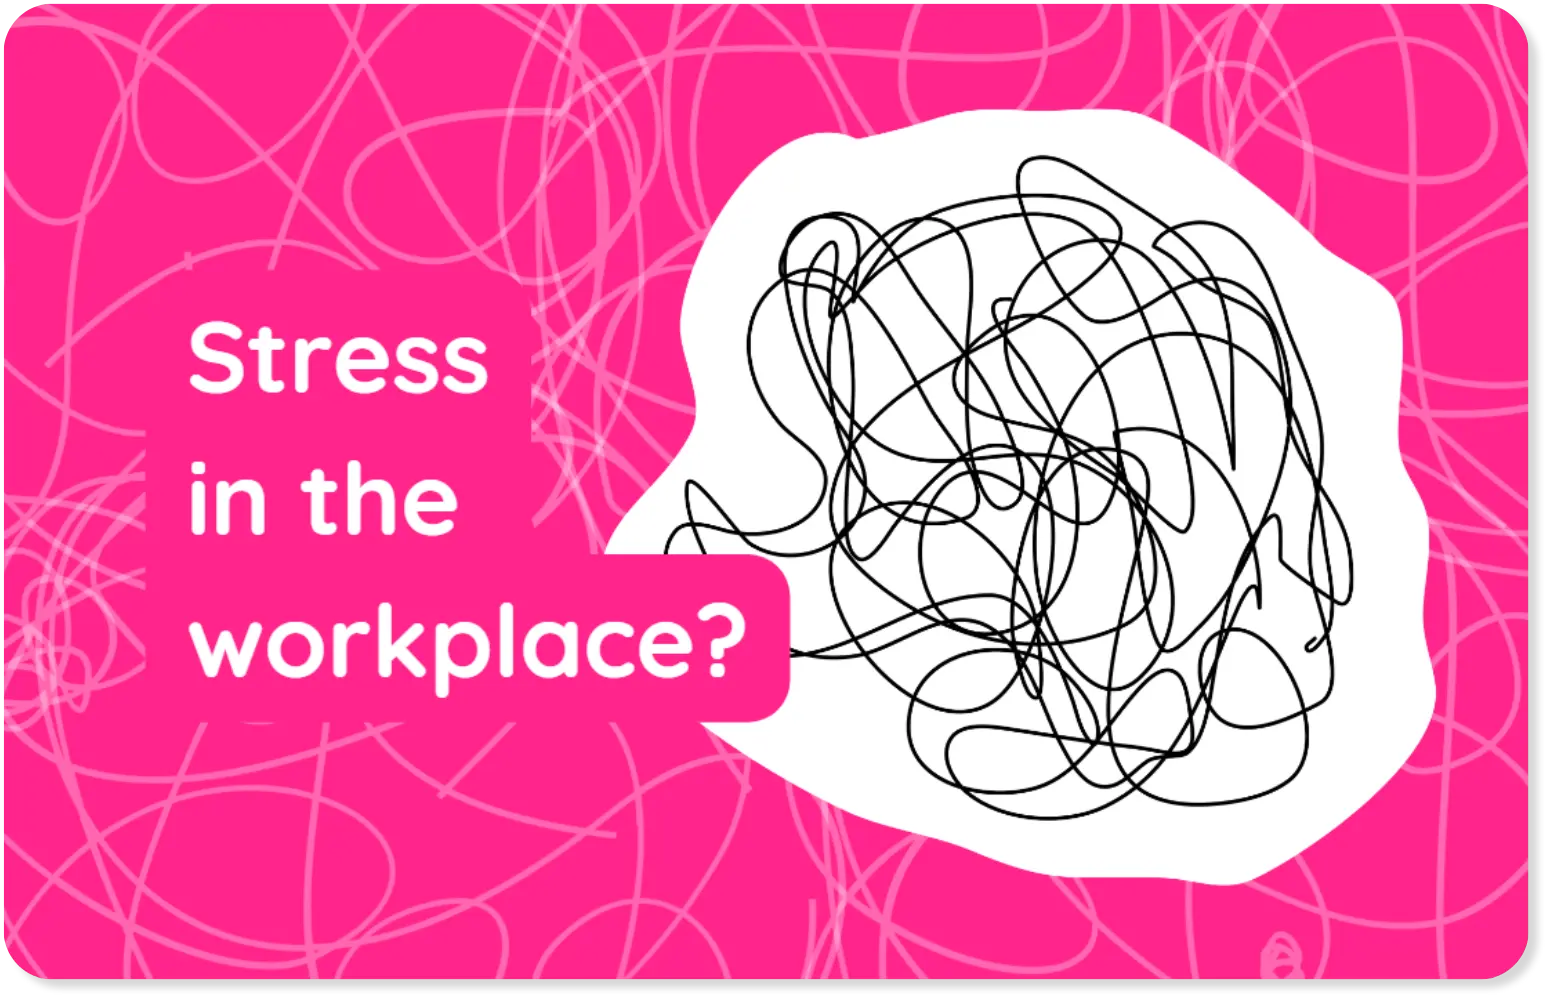 stress in the workplace?